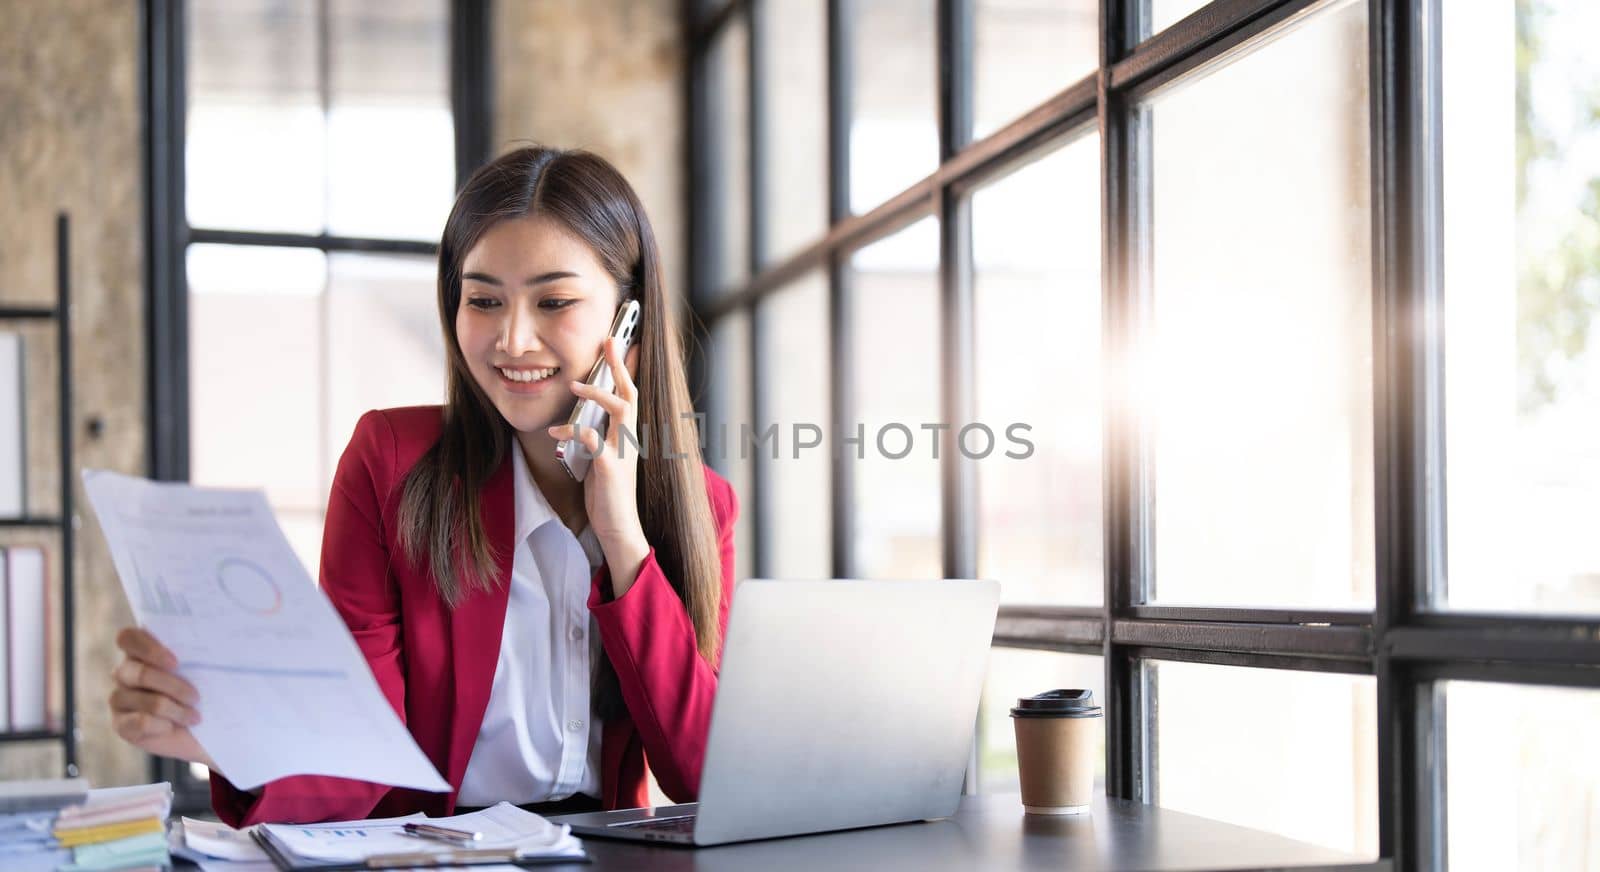 Portrait of a cheerful young business Asian woman using smartphone application in workplace office, concept of Small business employee freelance online sme marketing e-commerce telemarketing...